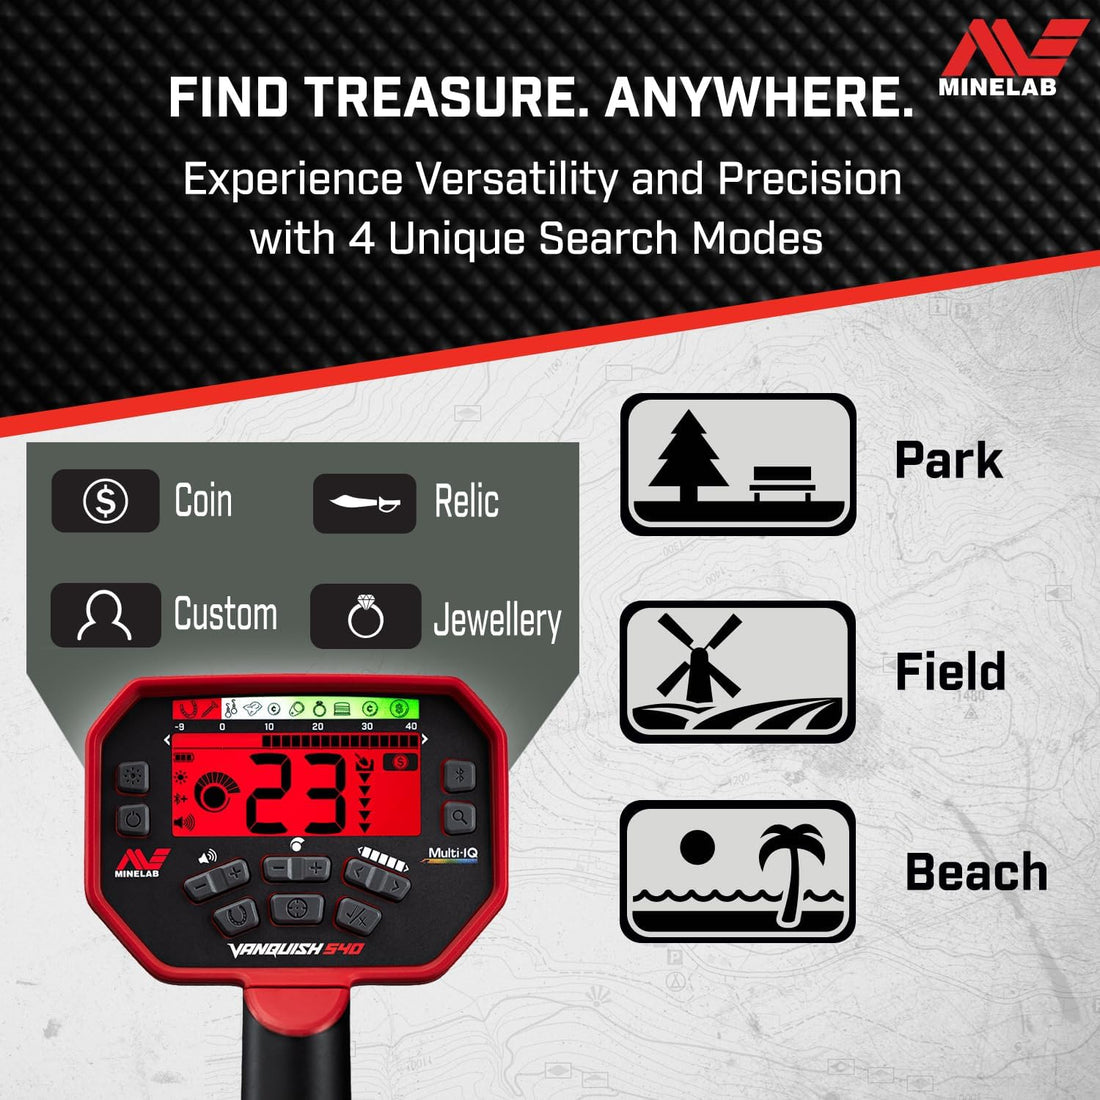 Minelab Vanquish 540 Multi-Frequency Pinpointing Metal Detector PRO PA –